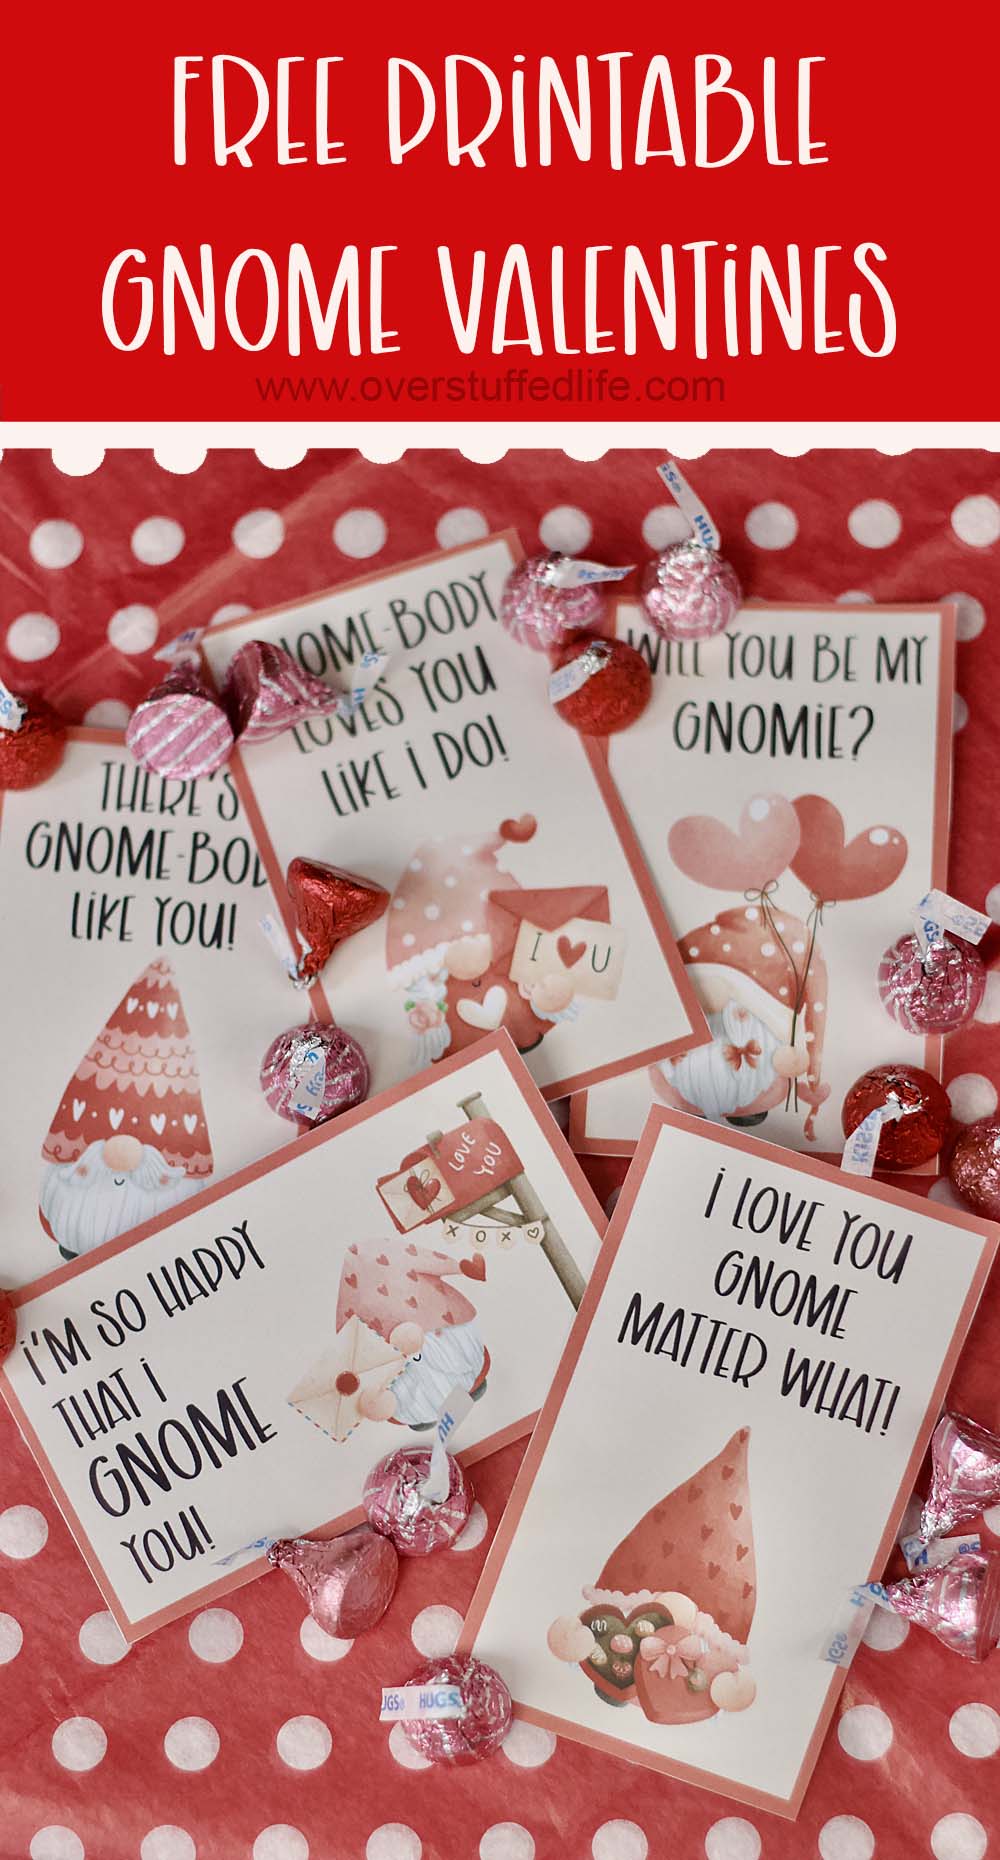 printable valentine cards featuring gnomes on a red polka dot background amongst Hershey's kisses.